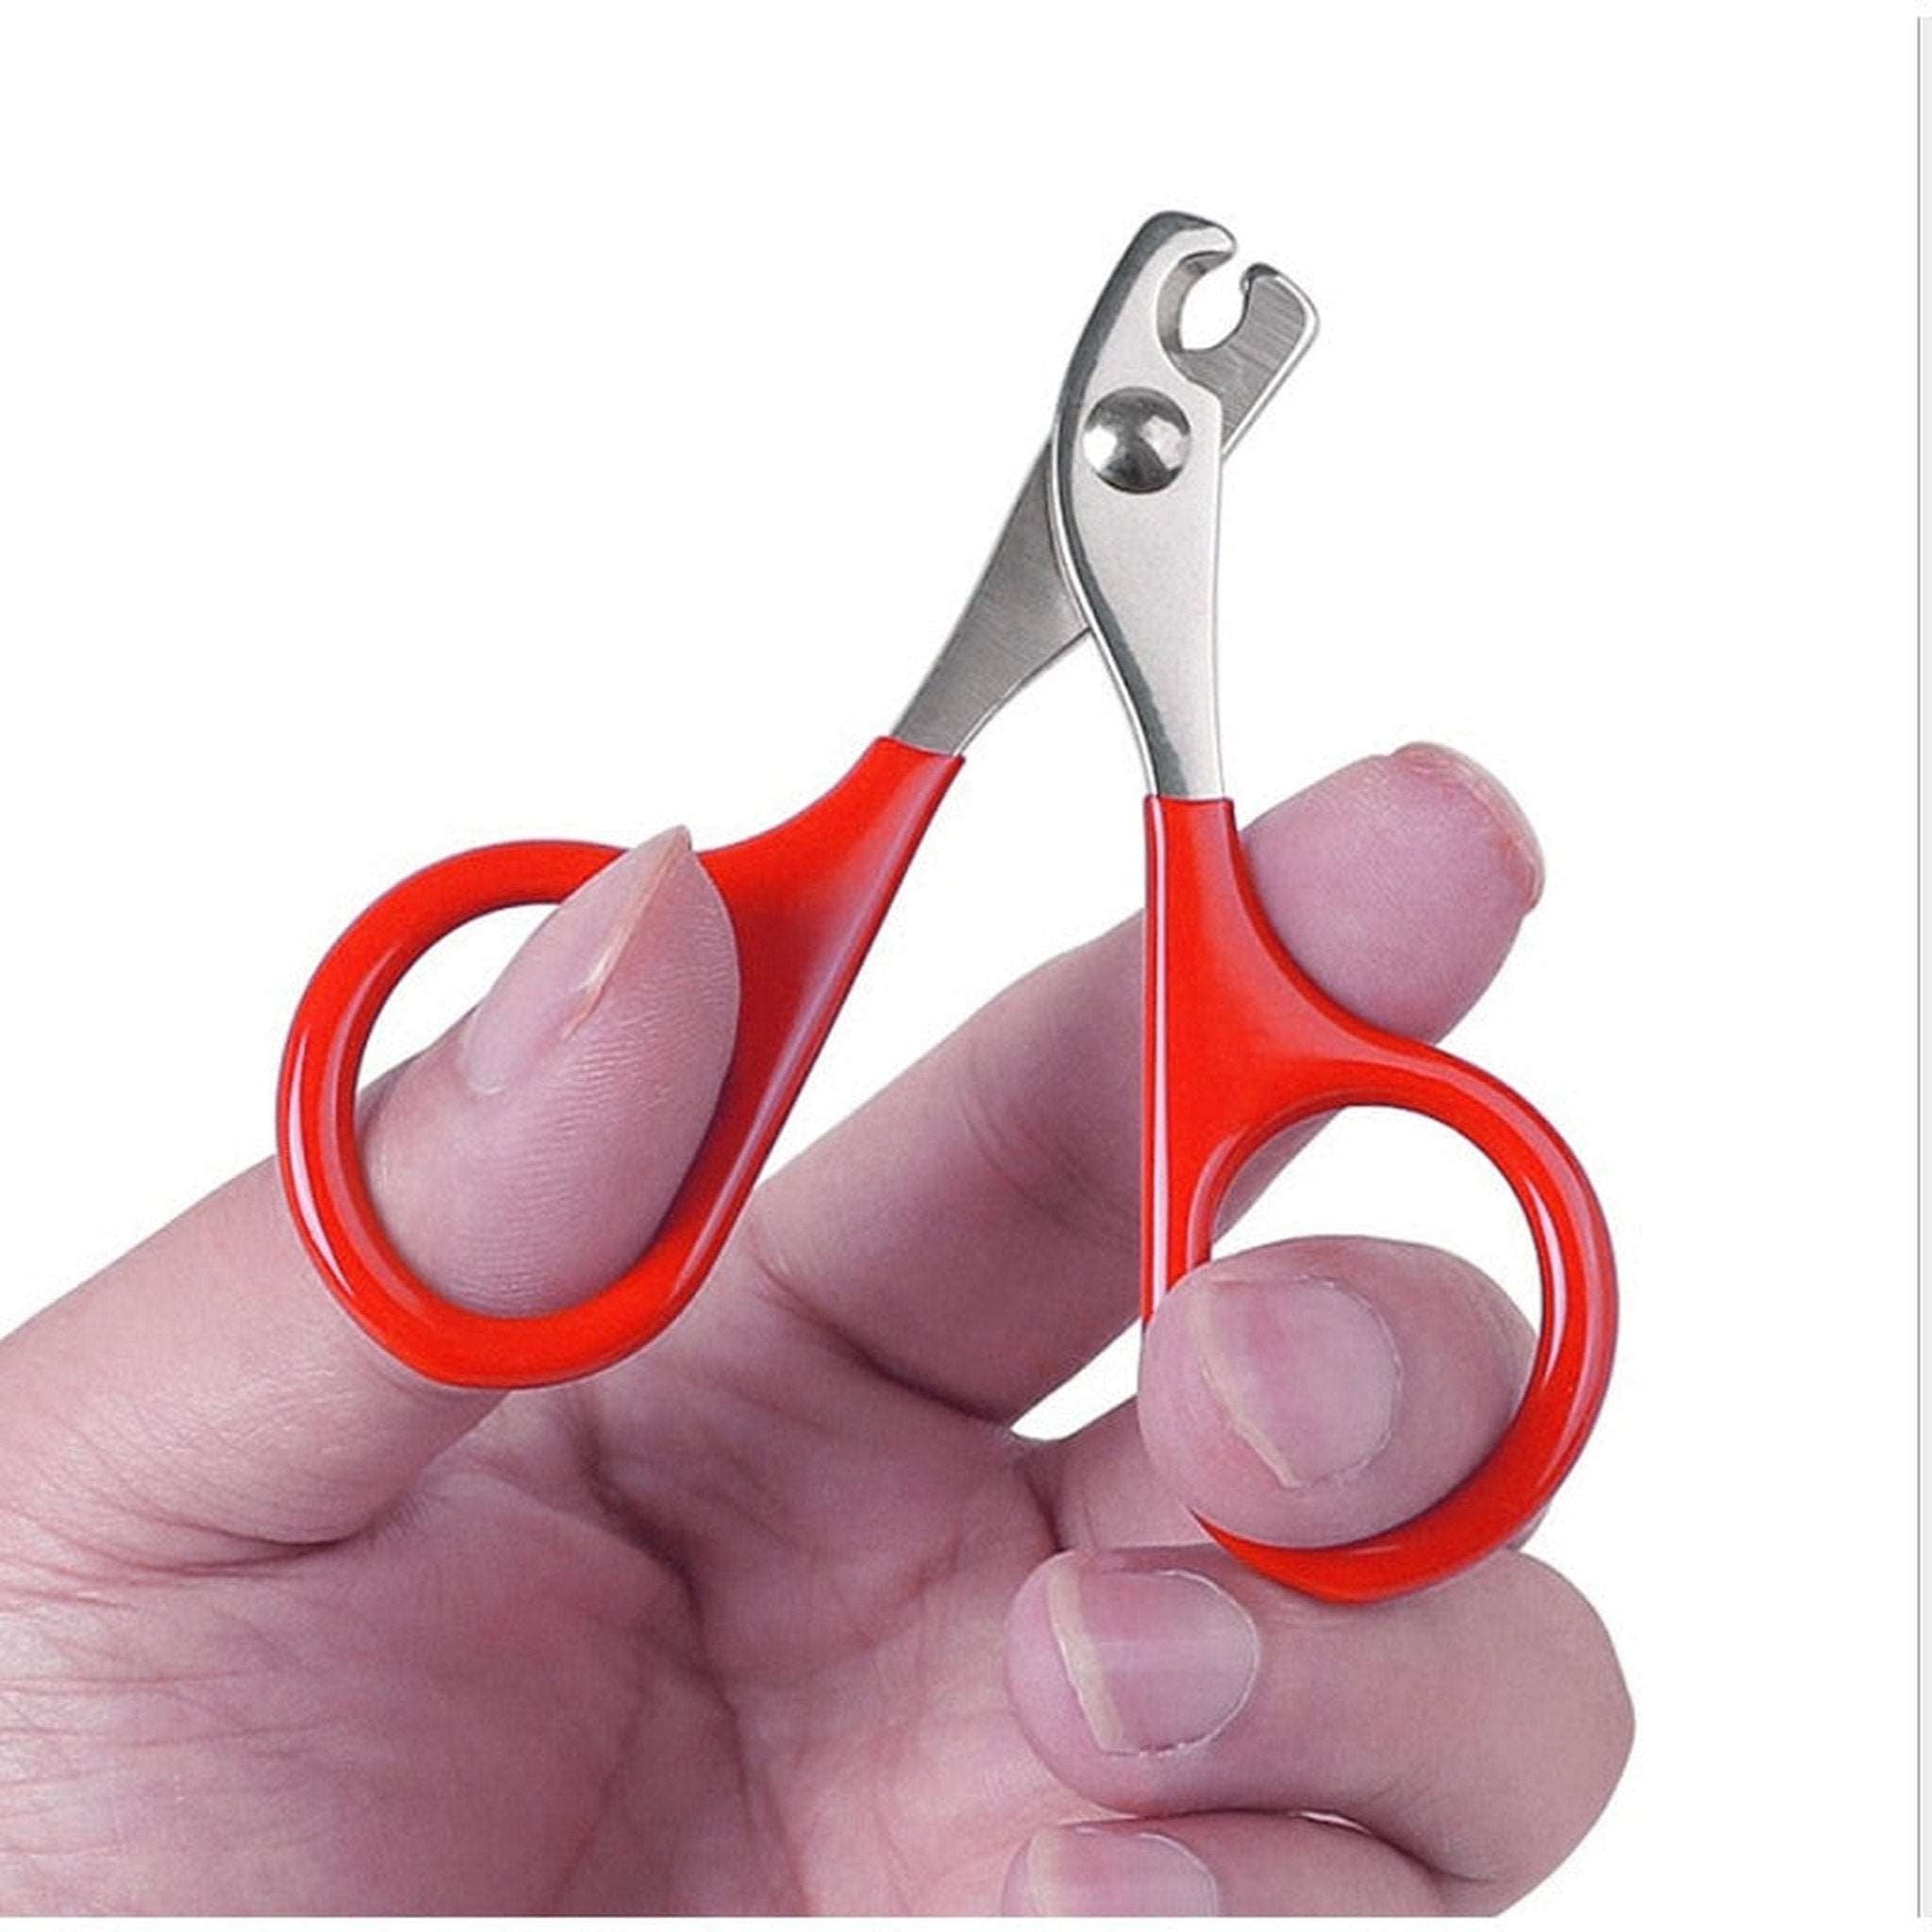 Precision Nail Clippers Bark Bliss Boutique